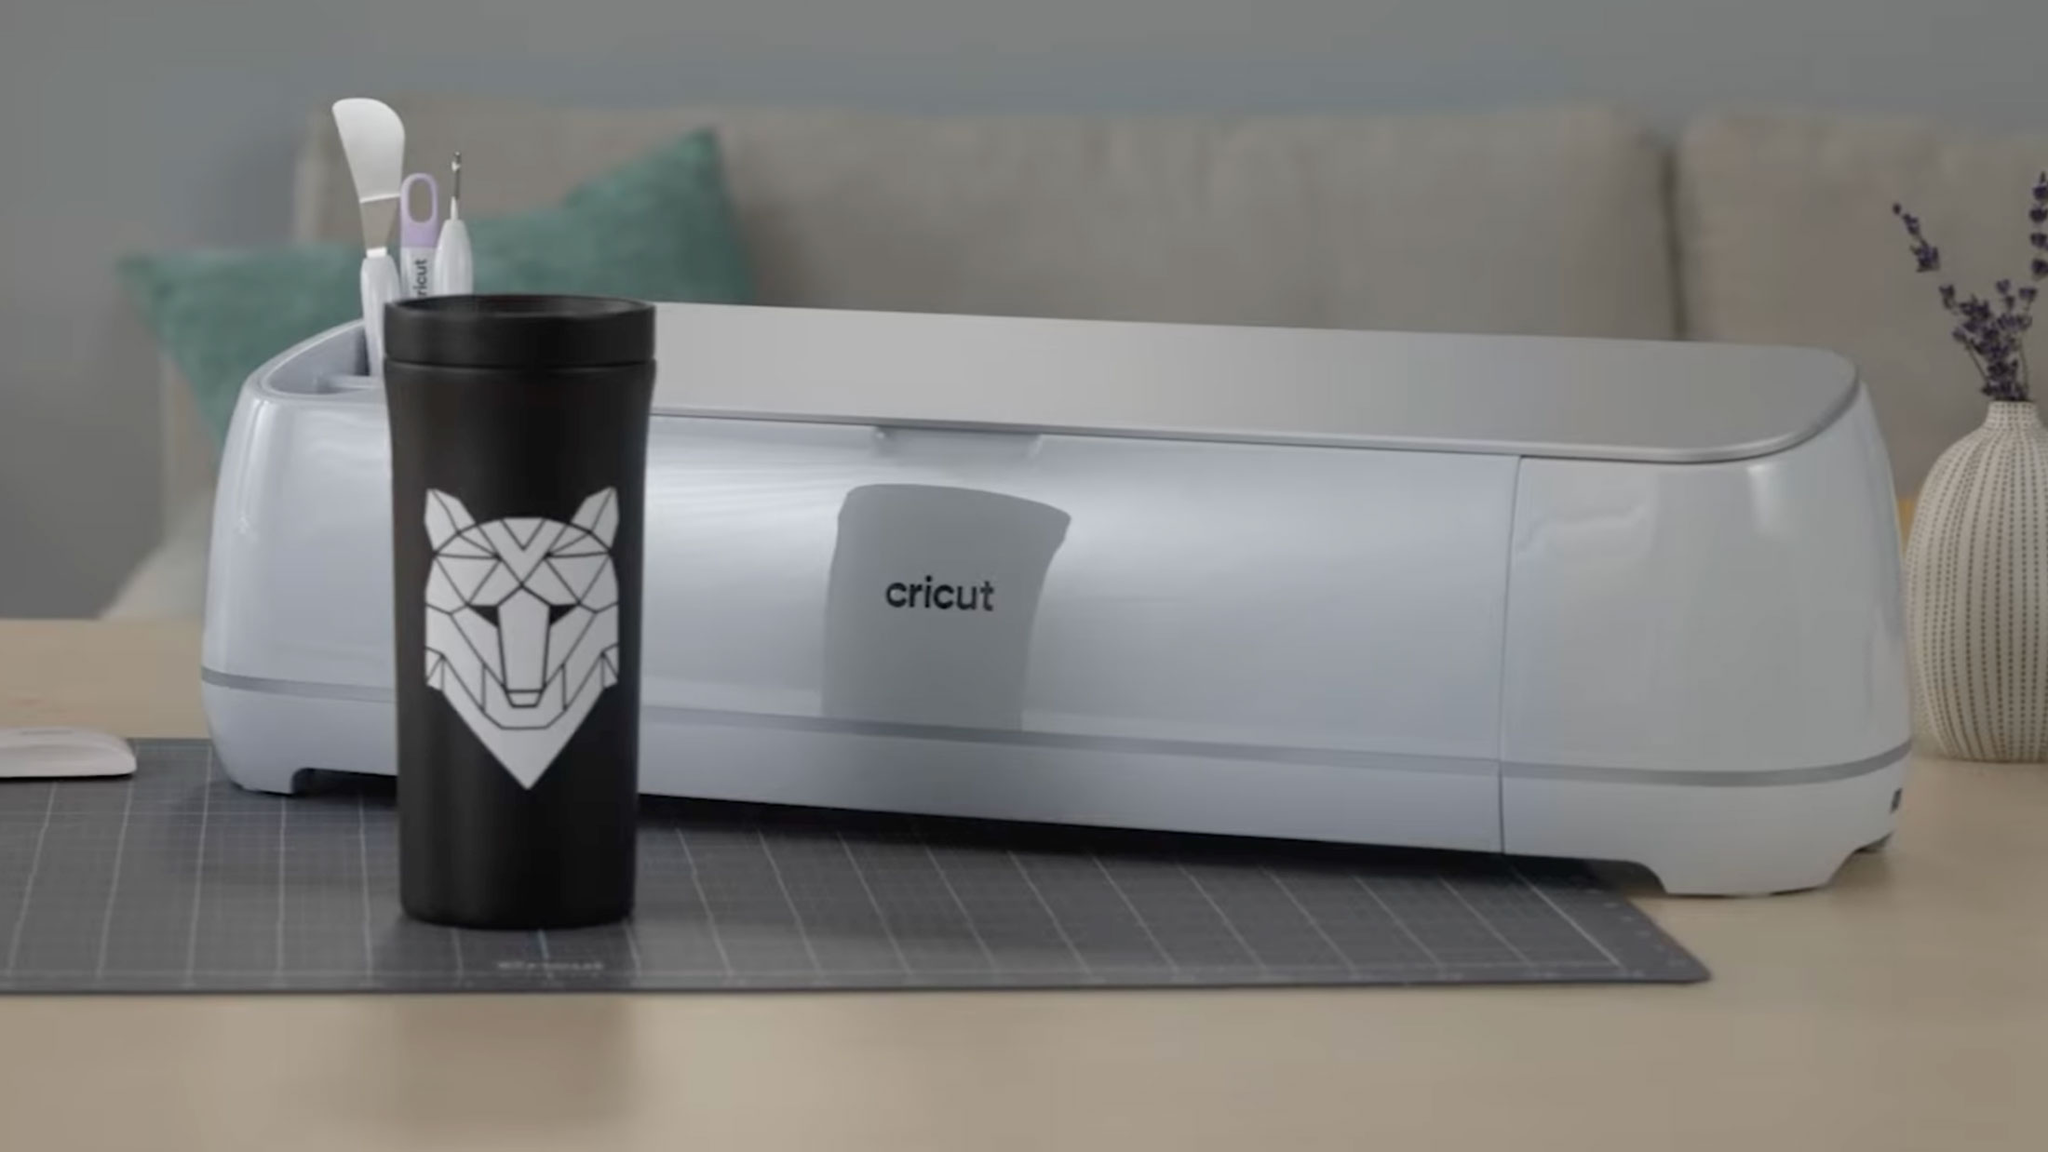 Getting Started with Cricut Maker